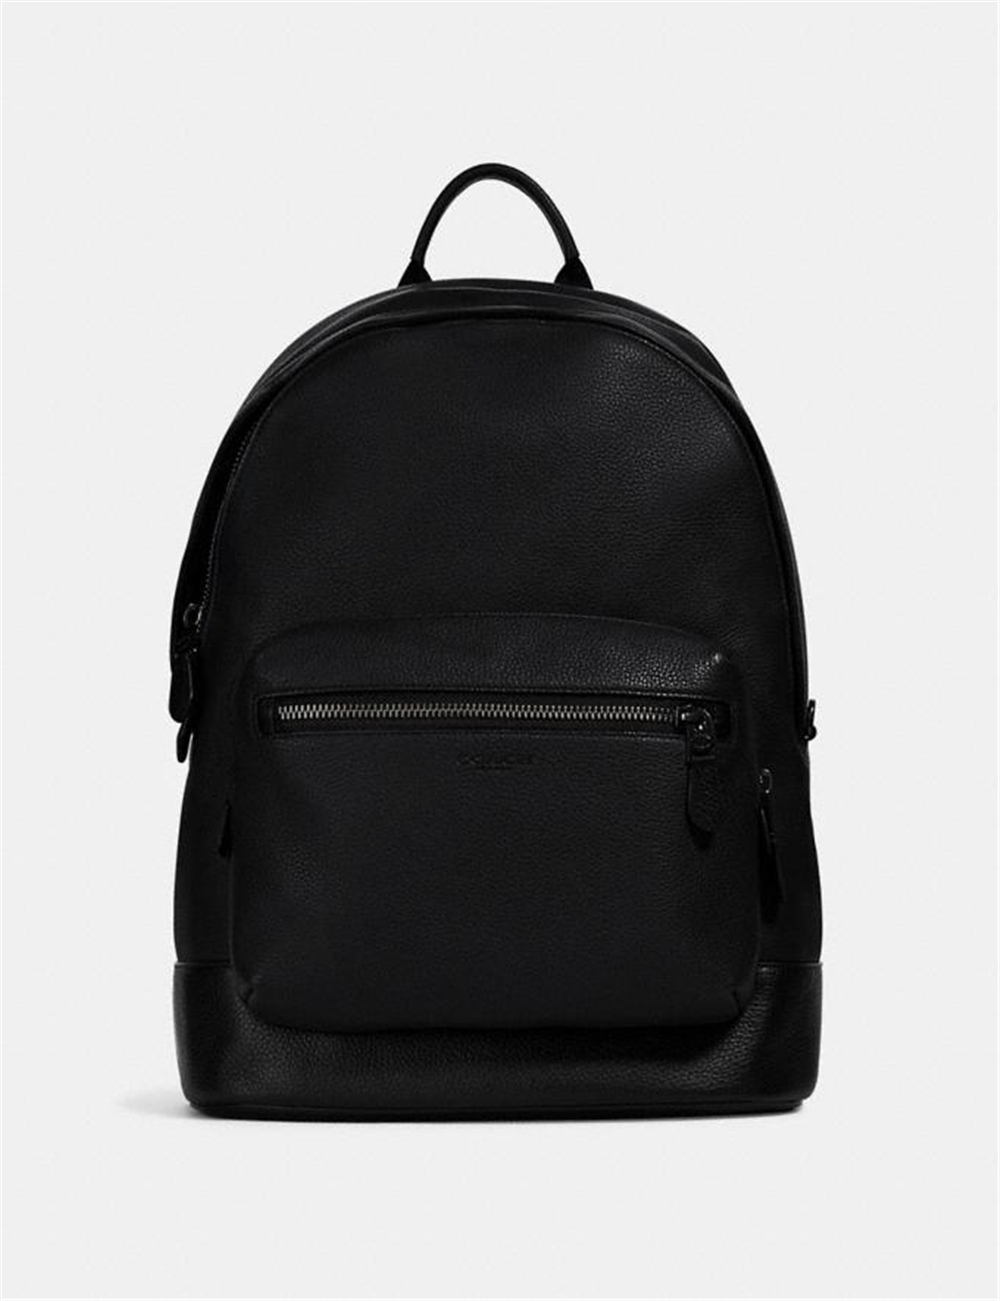 Coach 2854 Pebbled Leather West Backpack In Black - image 1 of 5